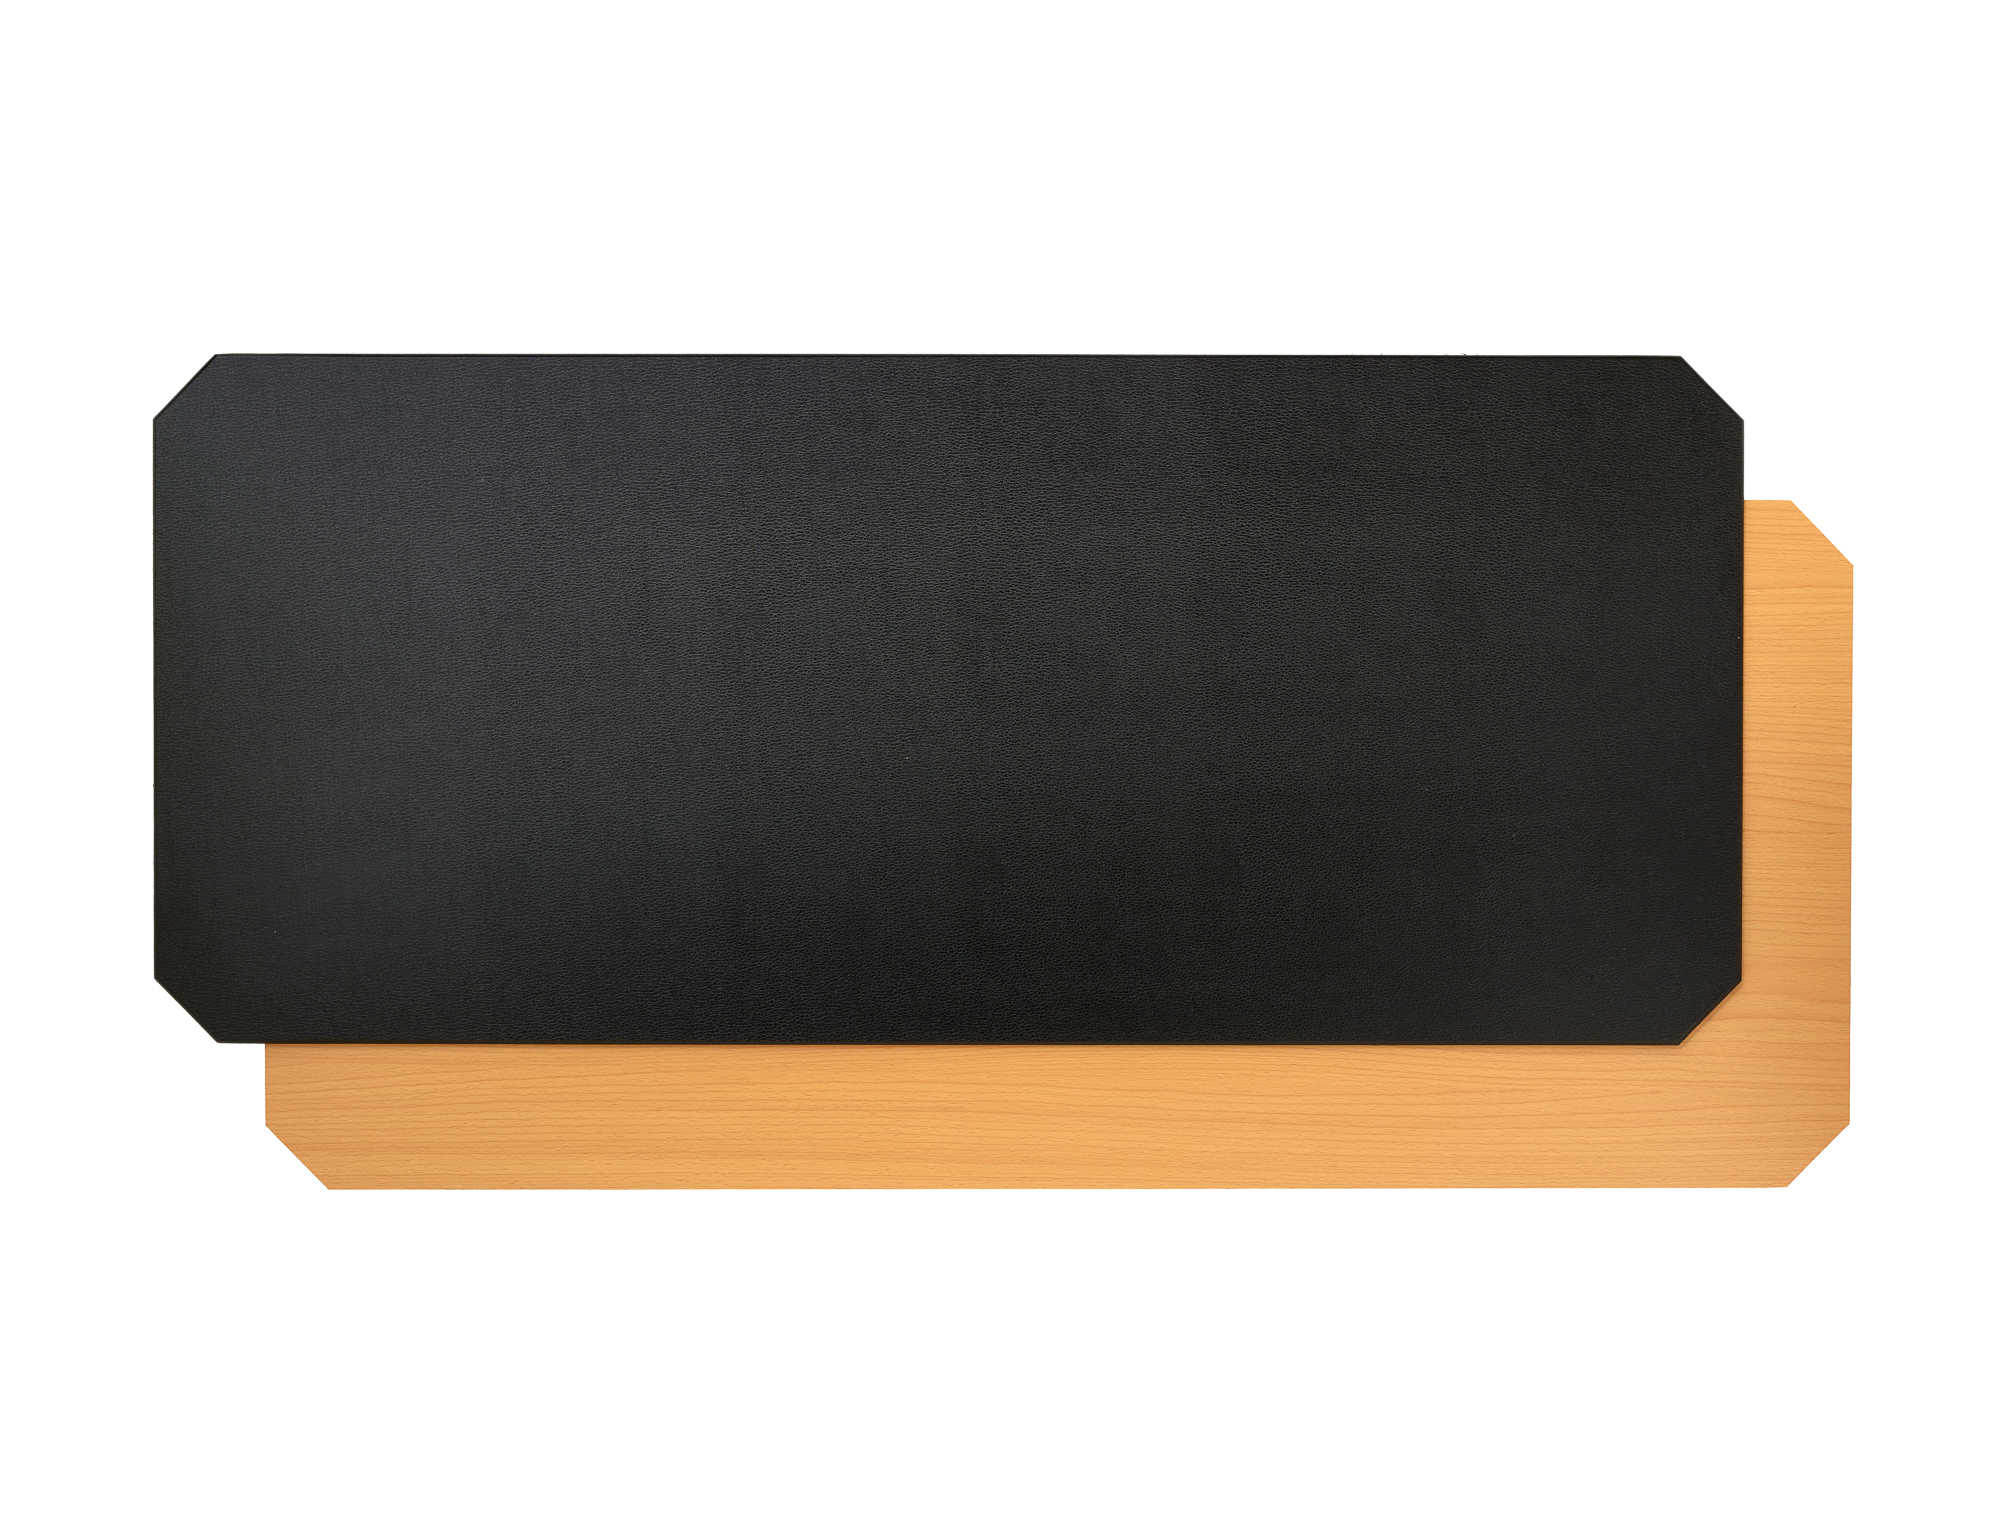 HSS Black/Wood Color Reversible Solid Work Surface, Fits on 18' x 48' wire shelf, 2-PACK